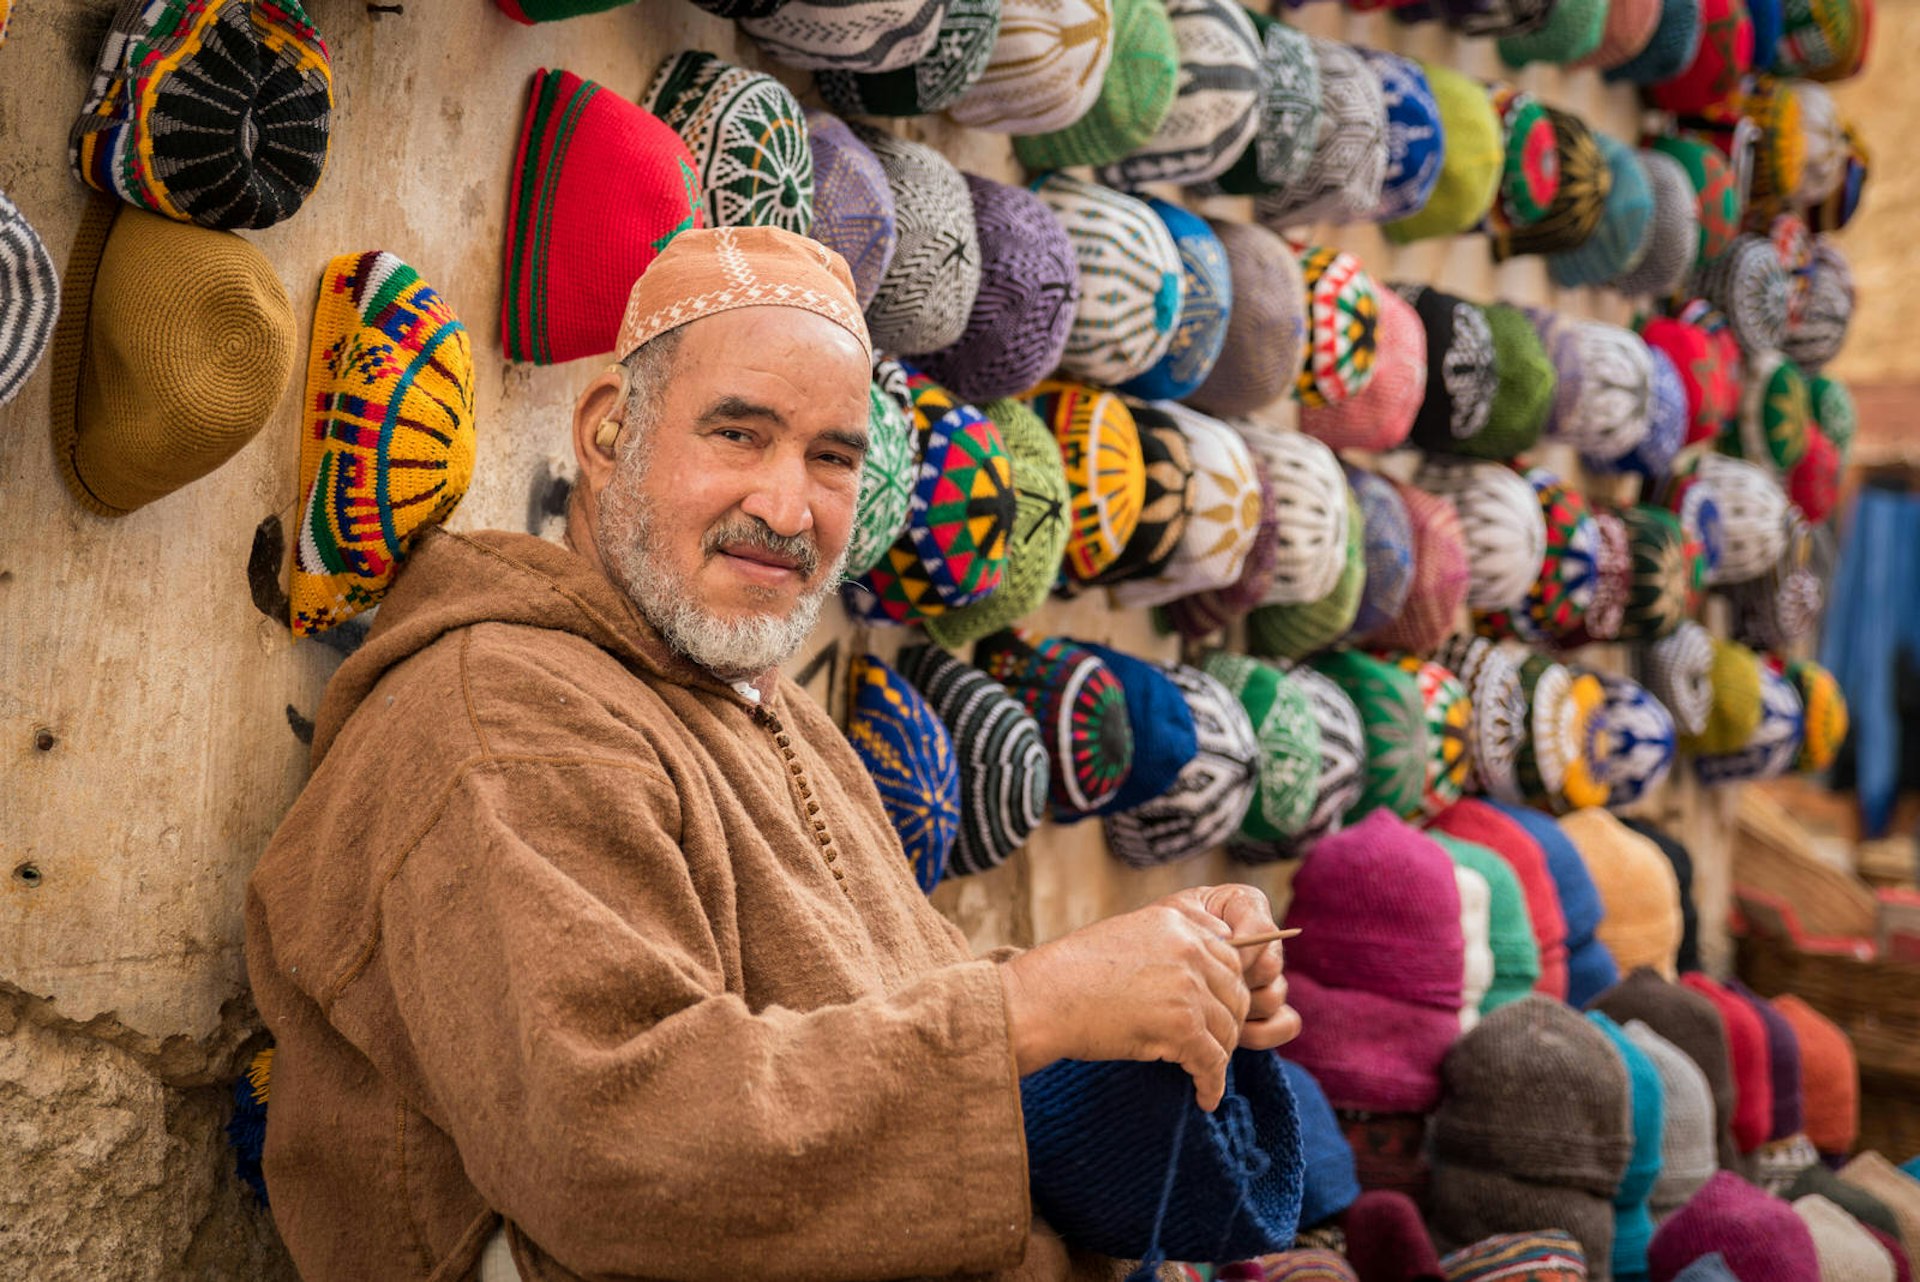 A hat seller works on his products in Marrakesh